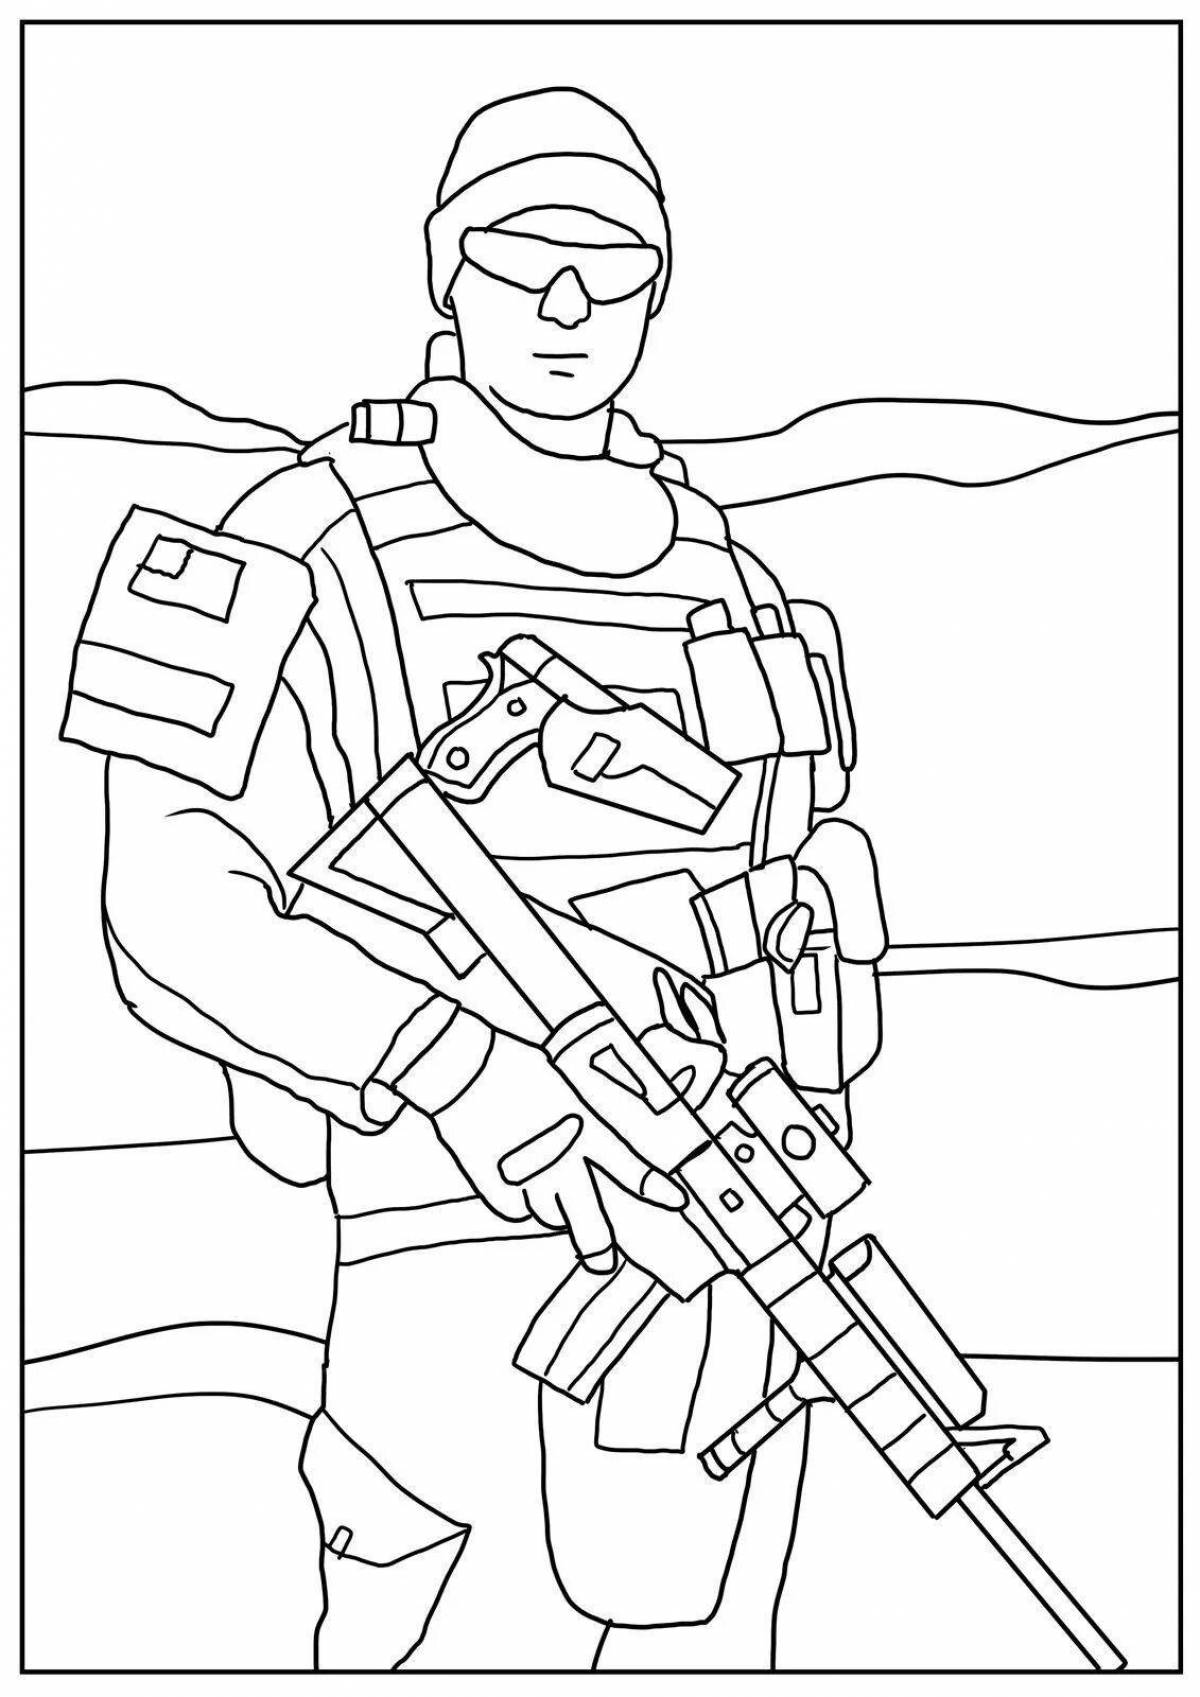 Adorable military profession coloring book for kids